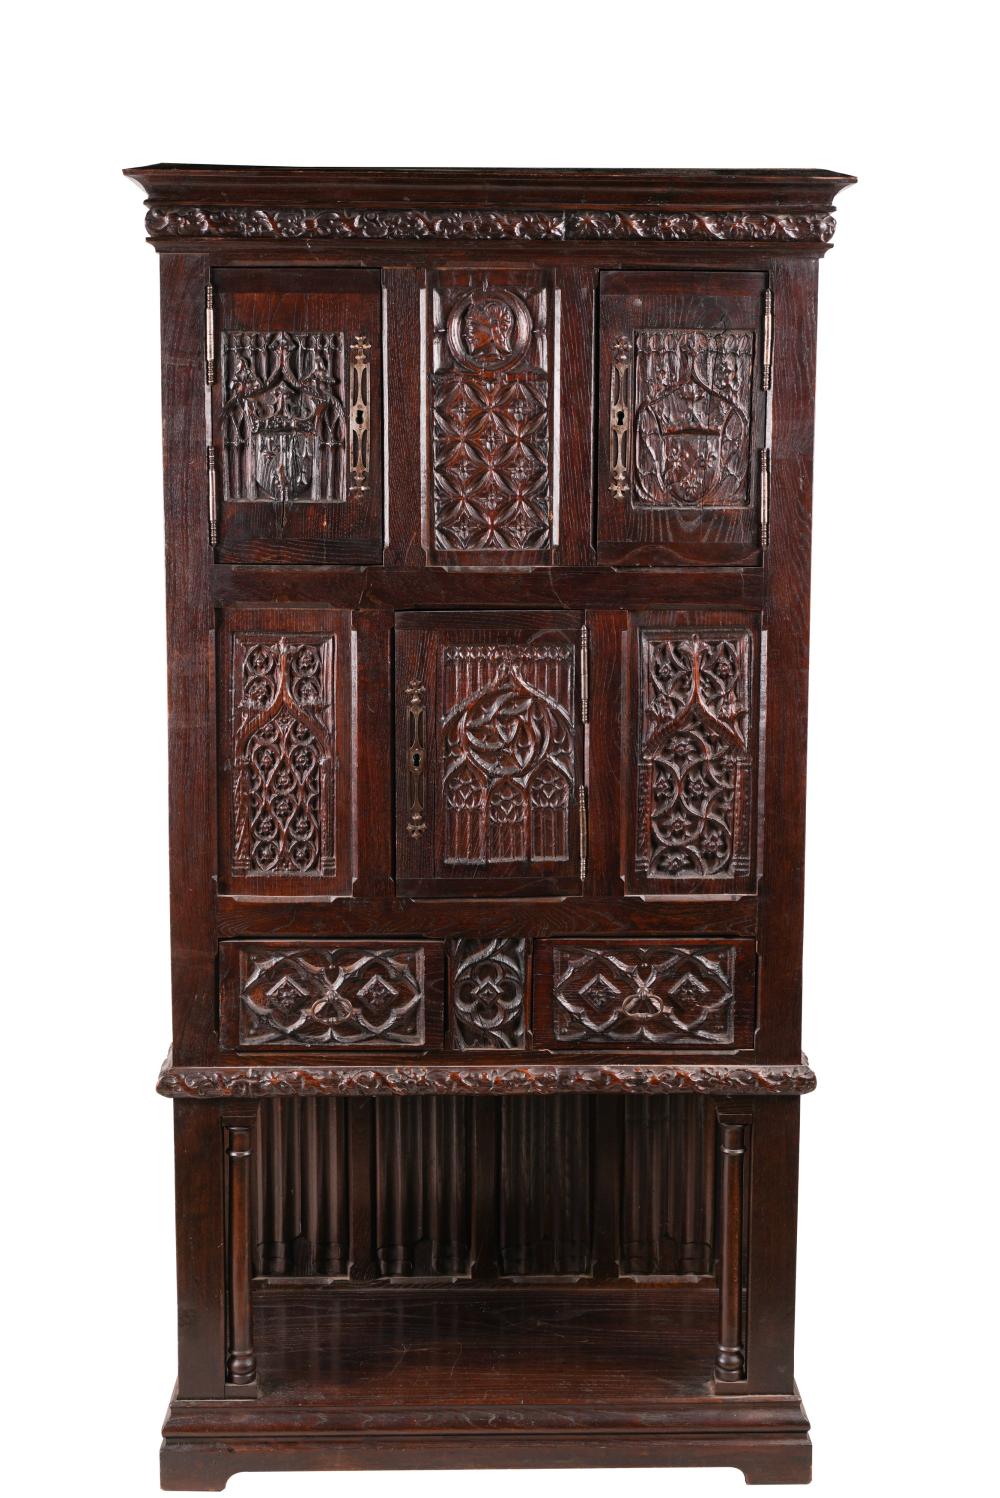 GOTHIC STYLE CARVED OAK RELIQUARY 301762